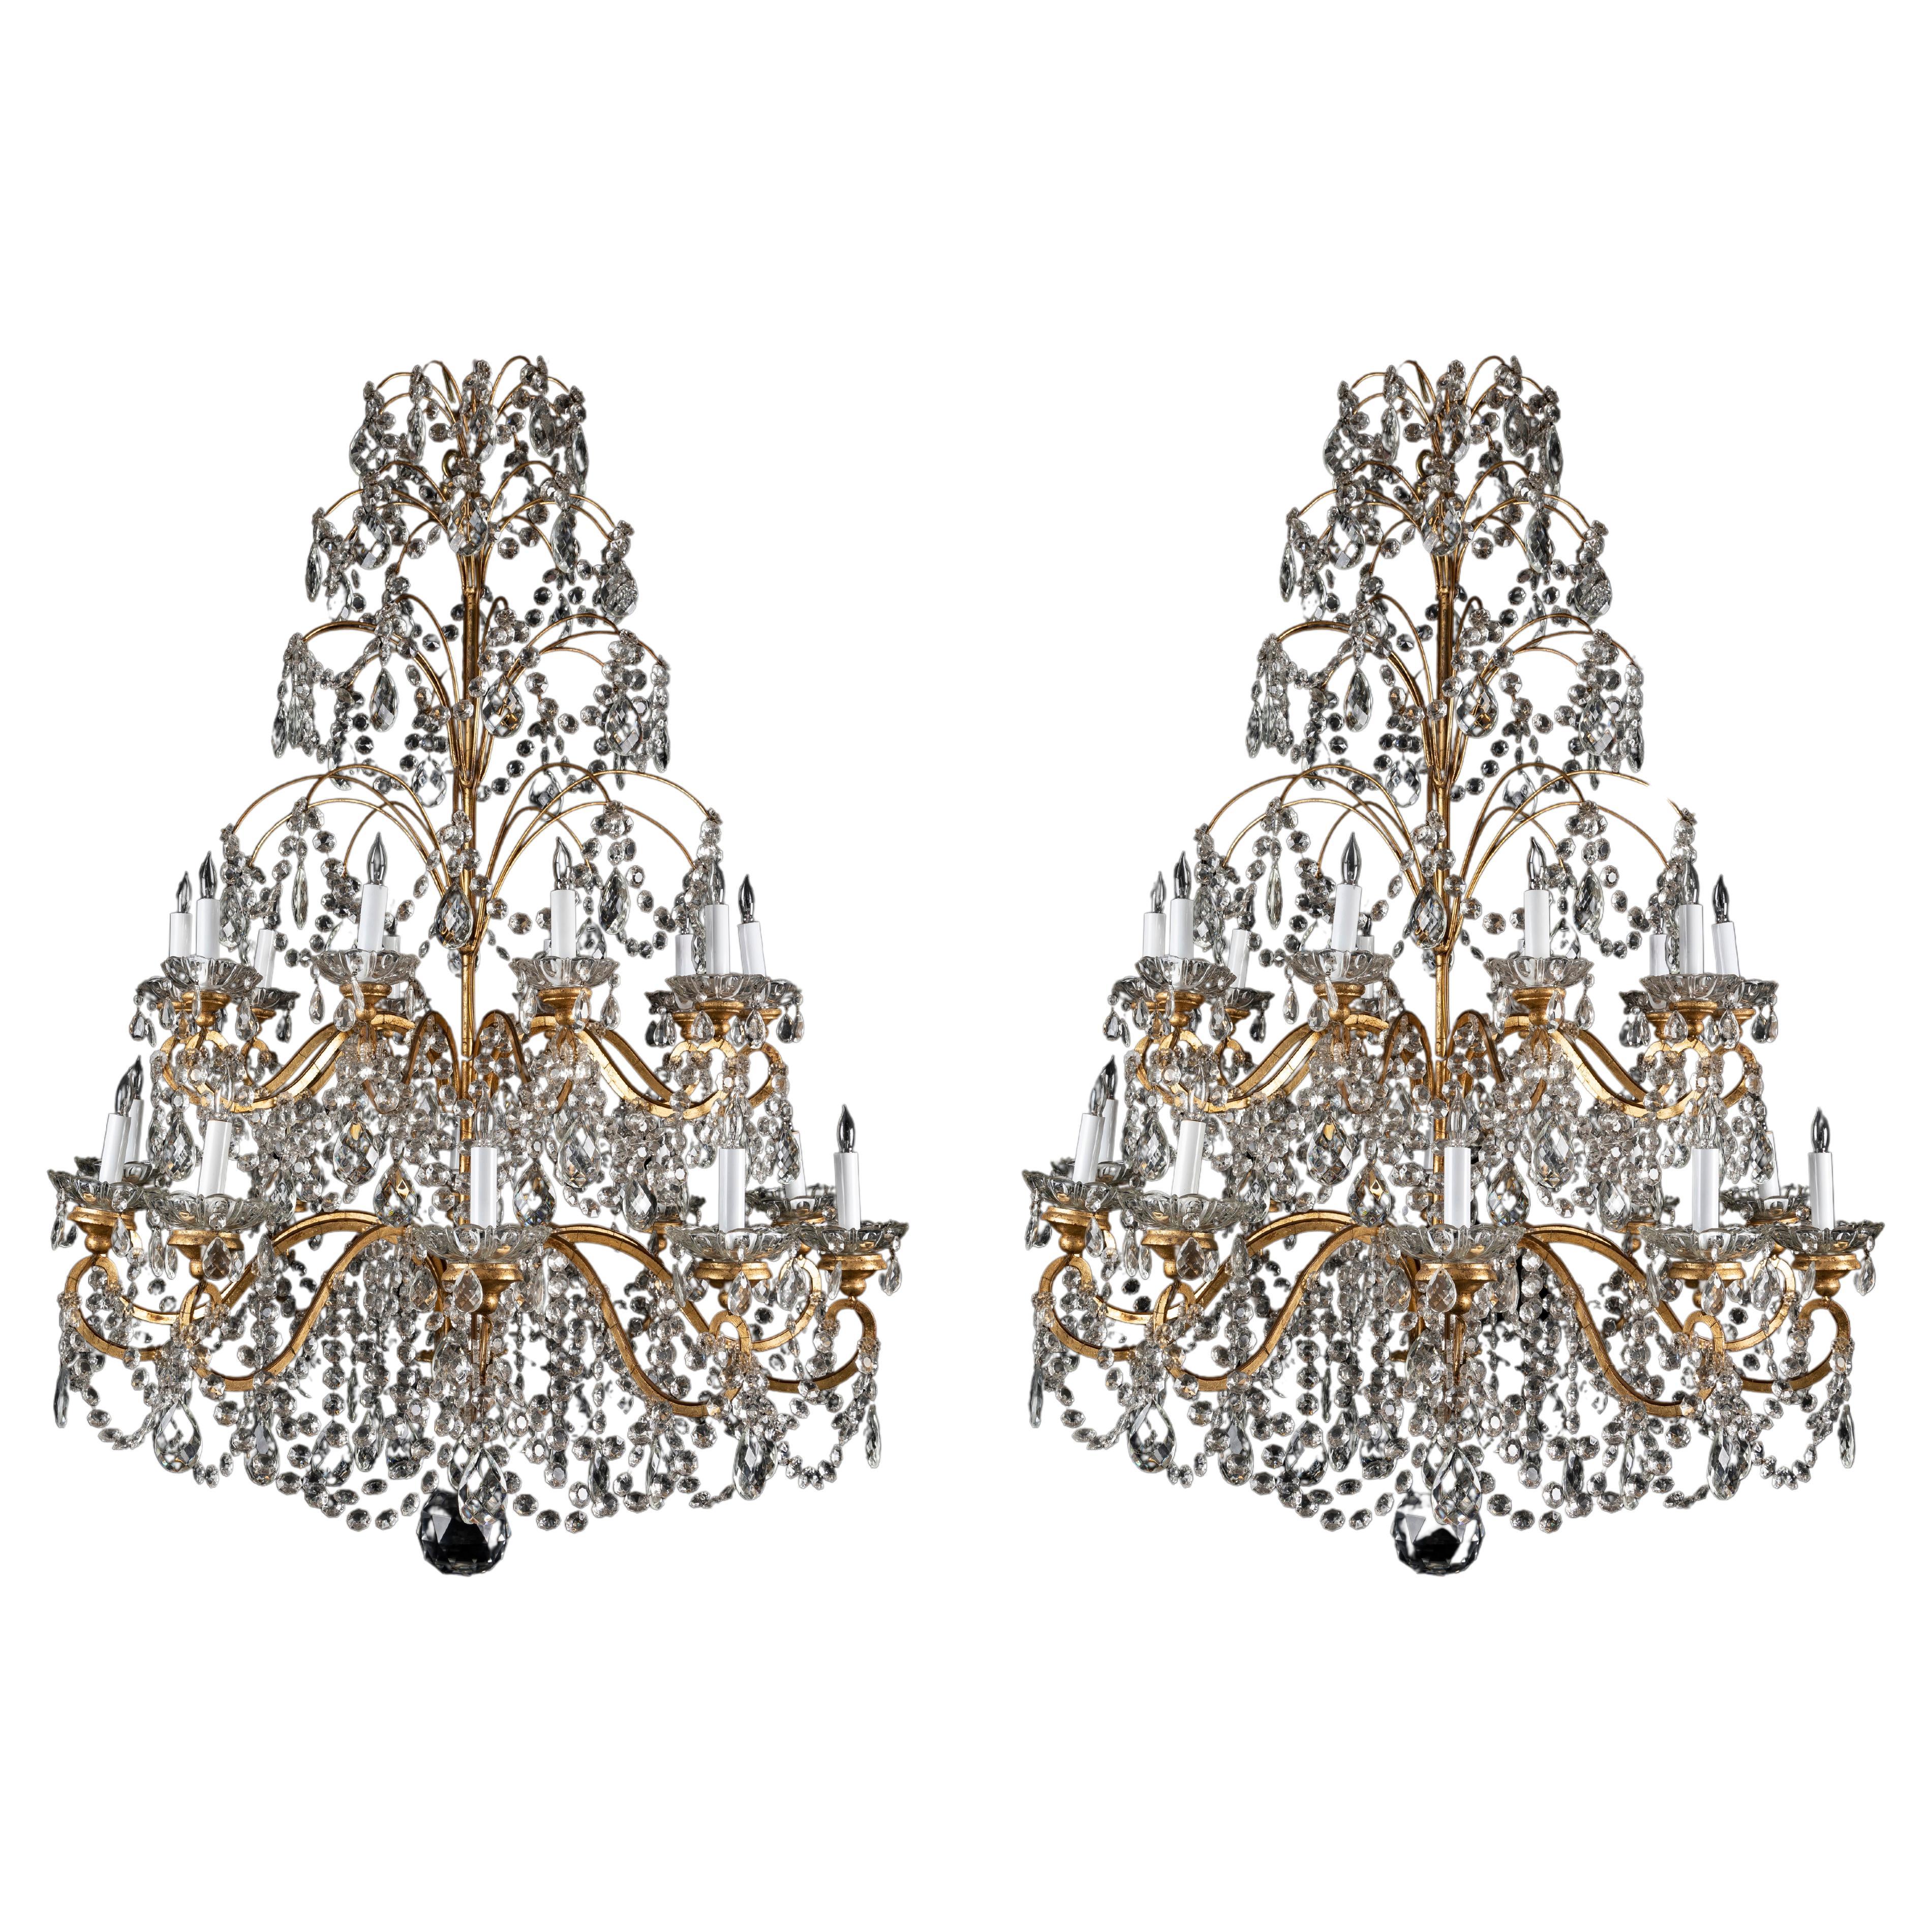  Pair of Large Antique French Louis XVI Style Gilt Bronze & Crystal Chandeliers  For Sale